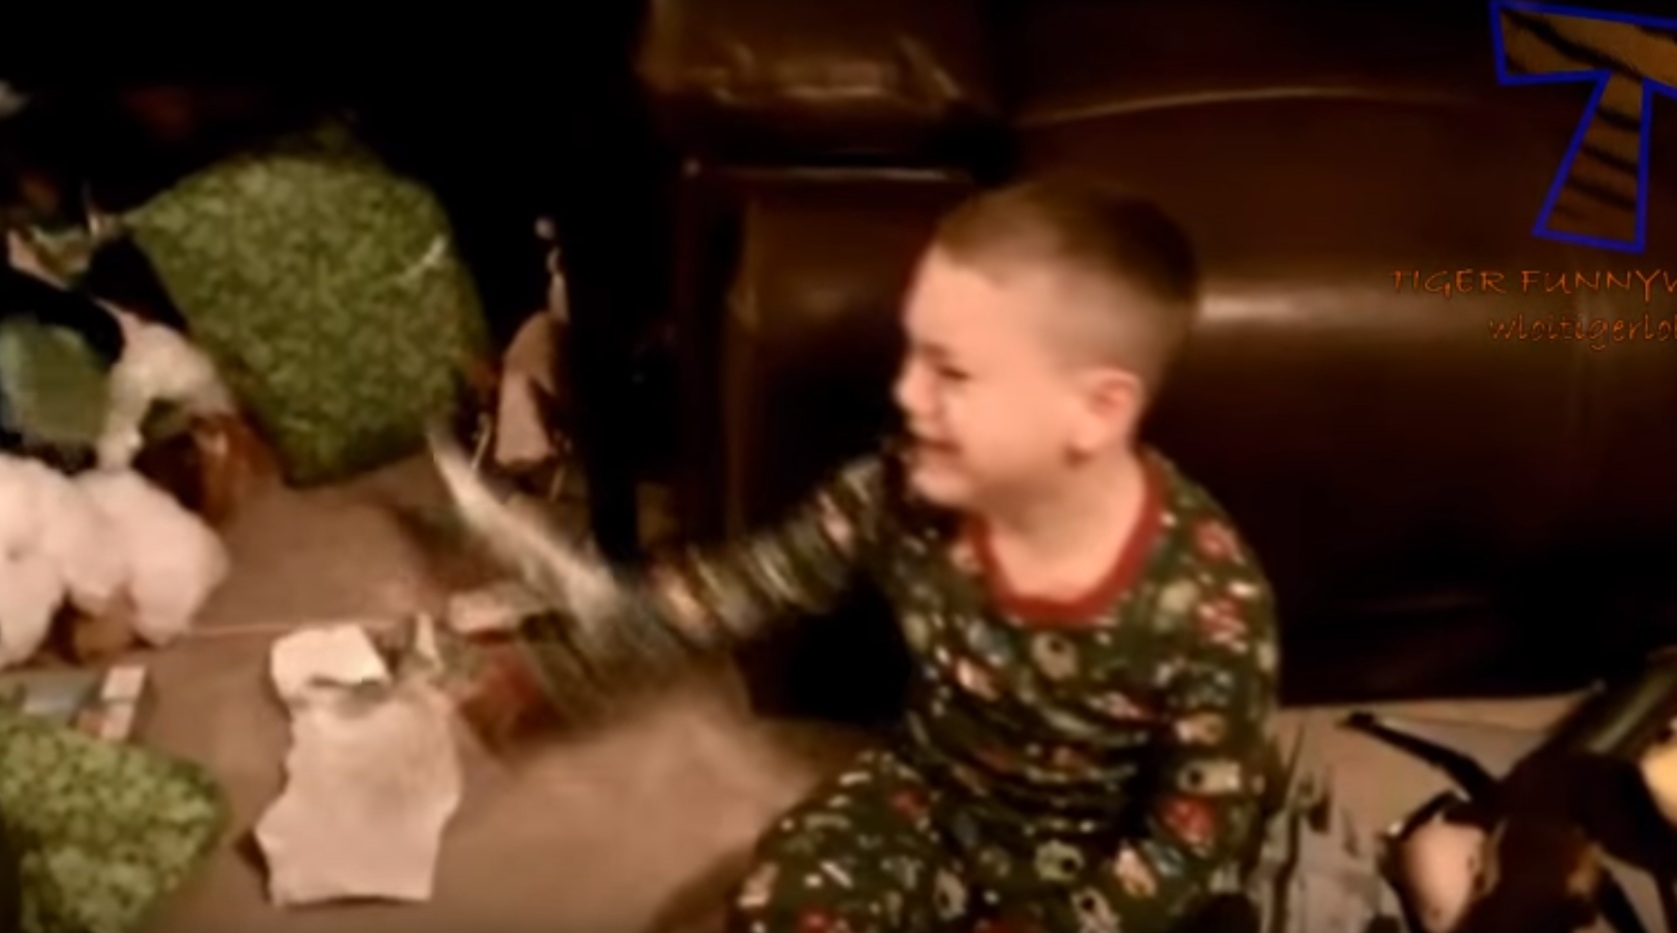 Kids reacting to presents